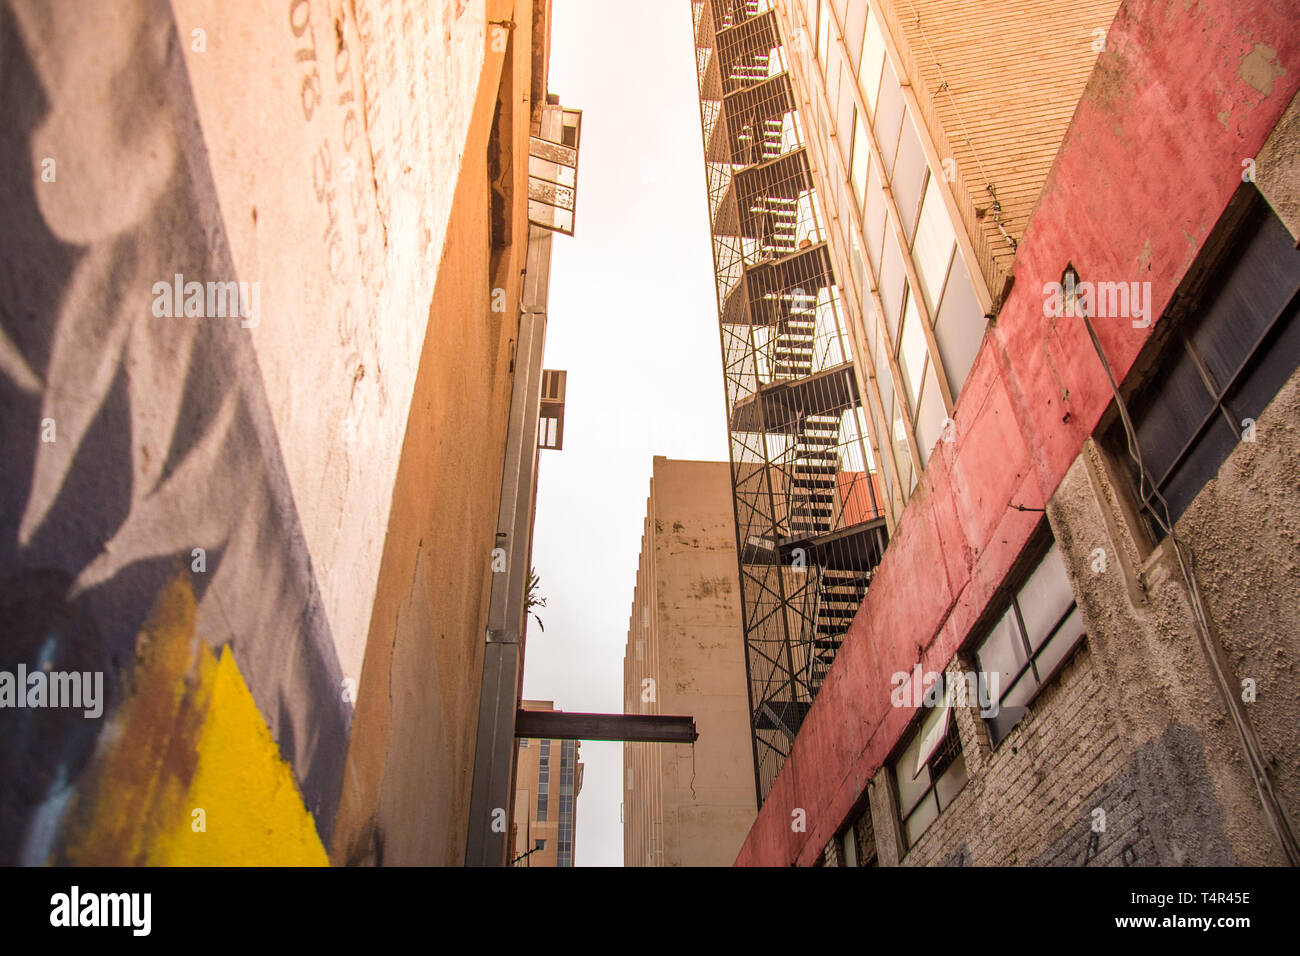 Johannesburg / South Africa - November 19 2016: an alleyway between tall buildings Stock Photo